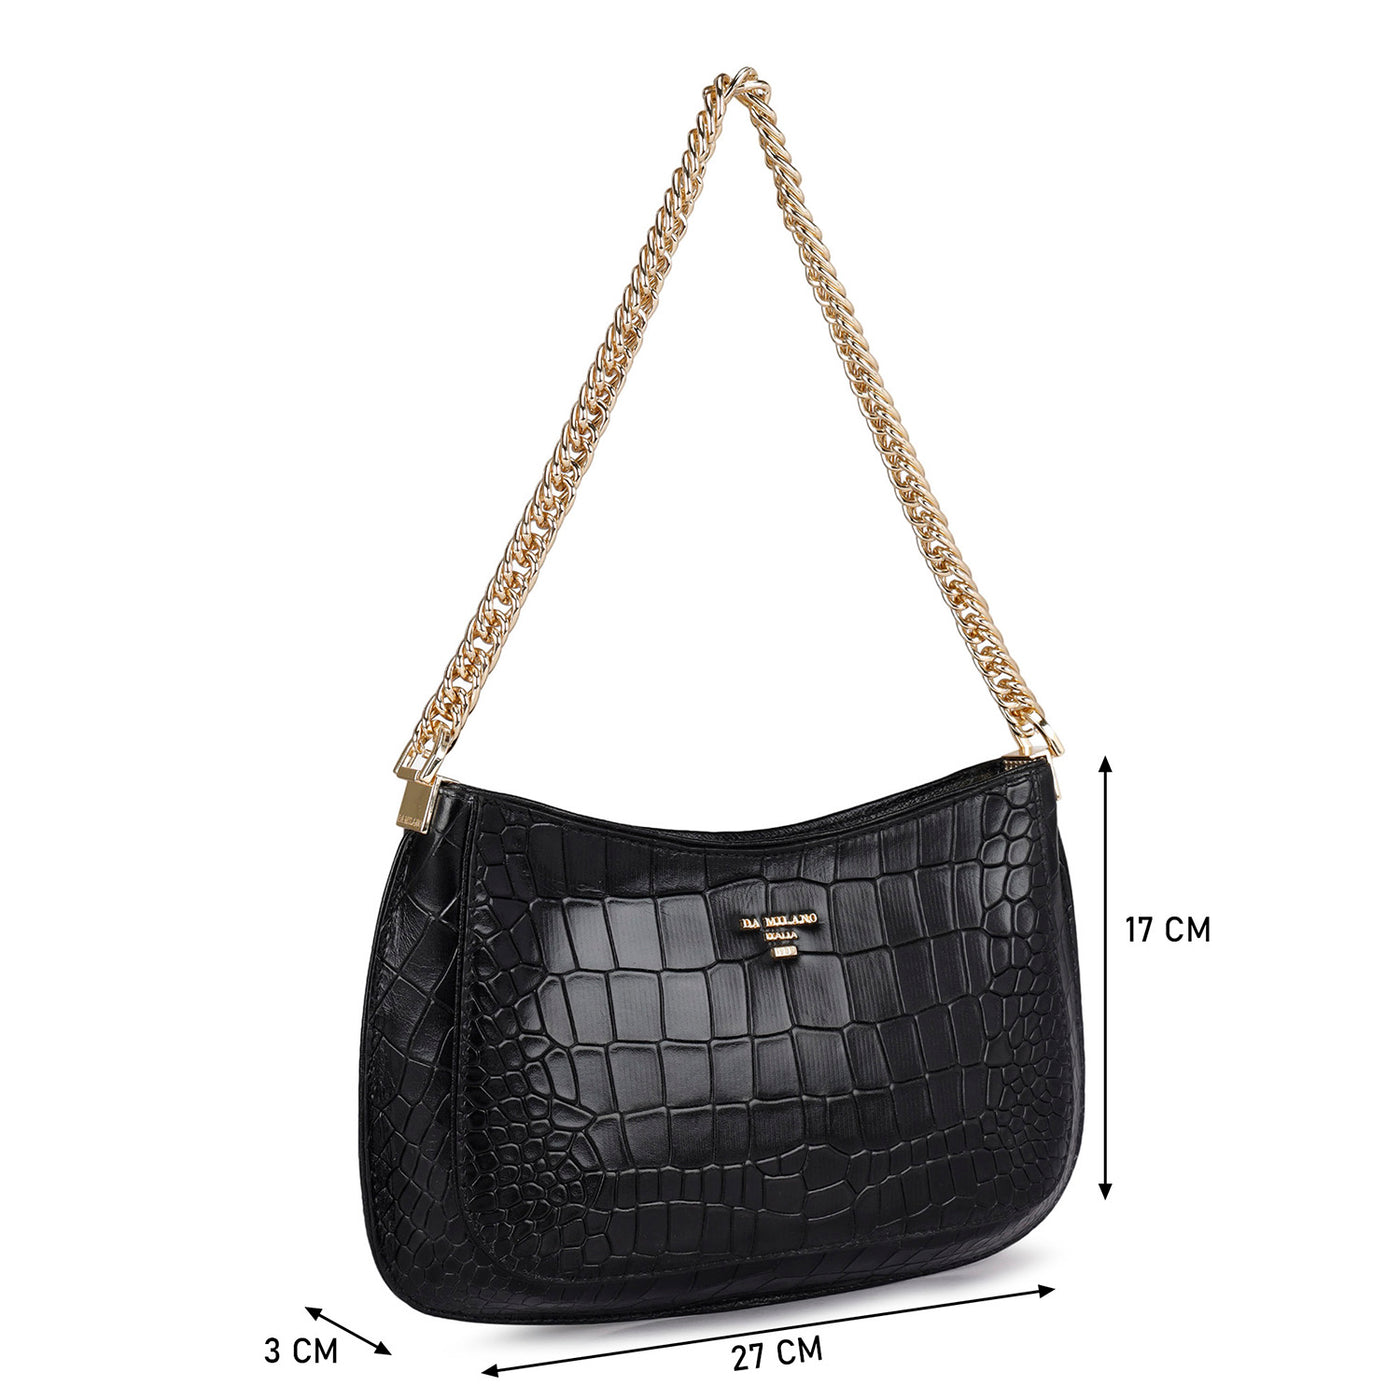 Small Croco Leather Baguette - Black